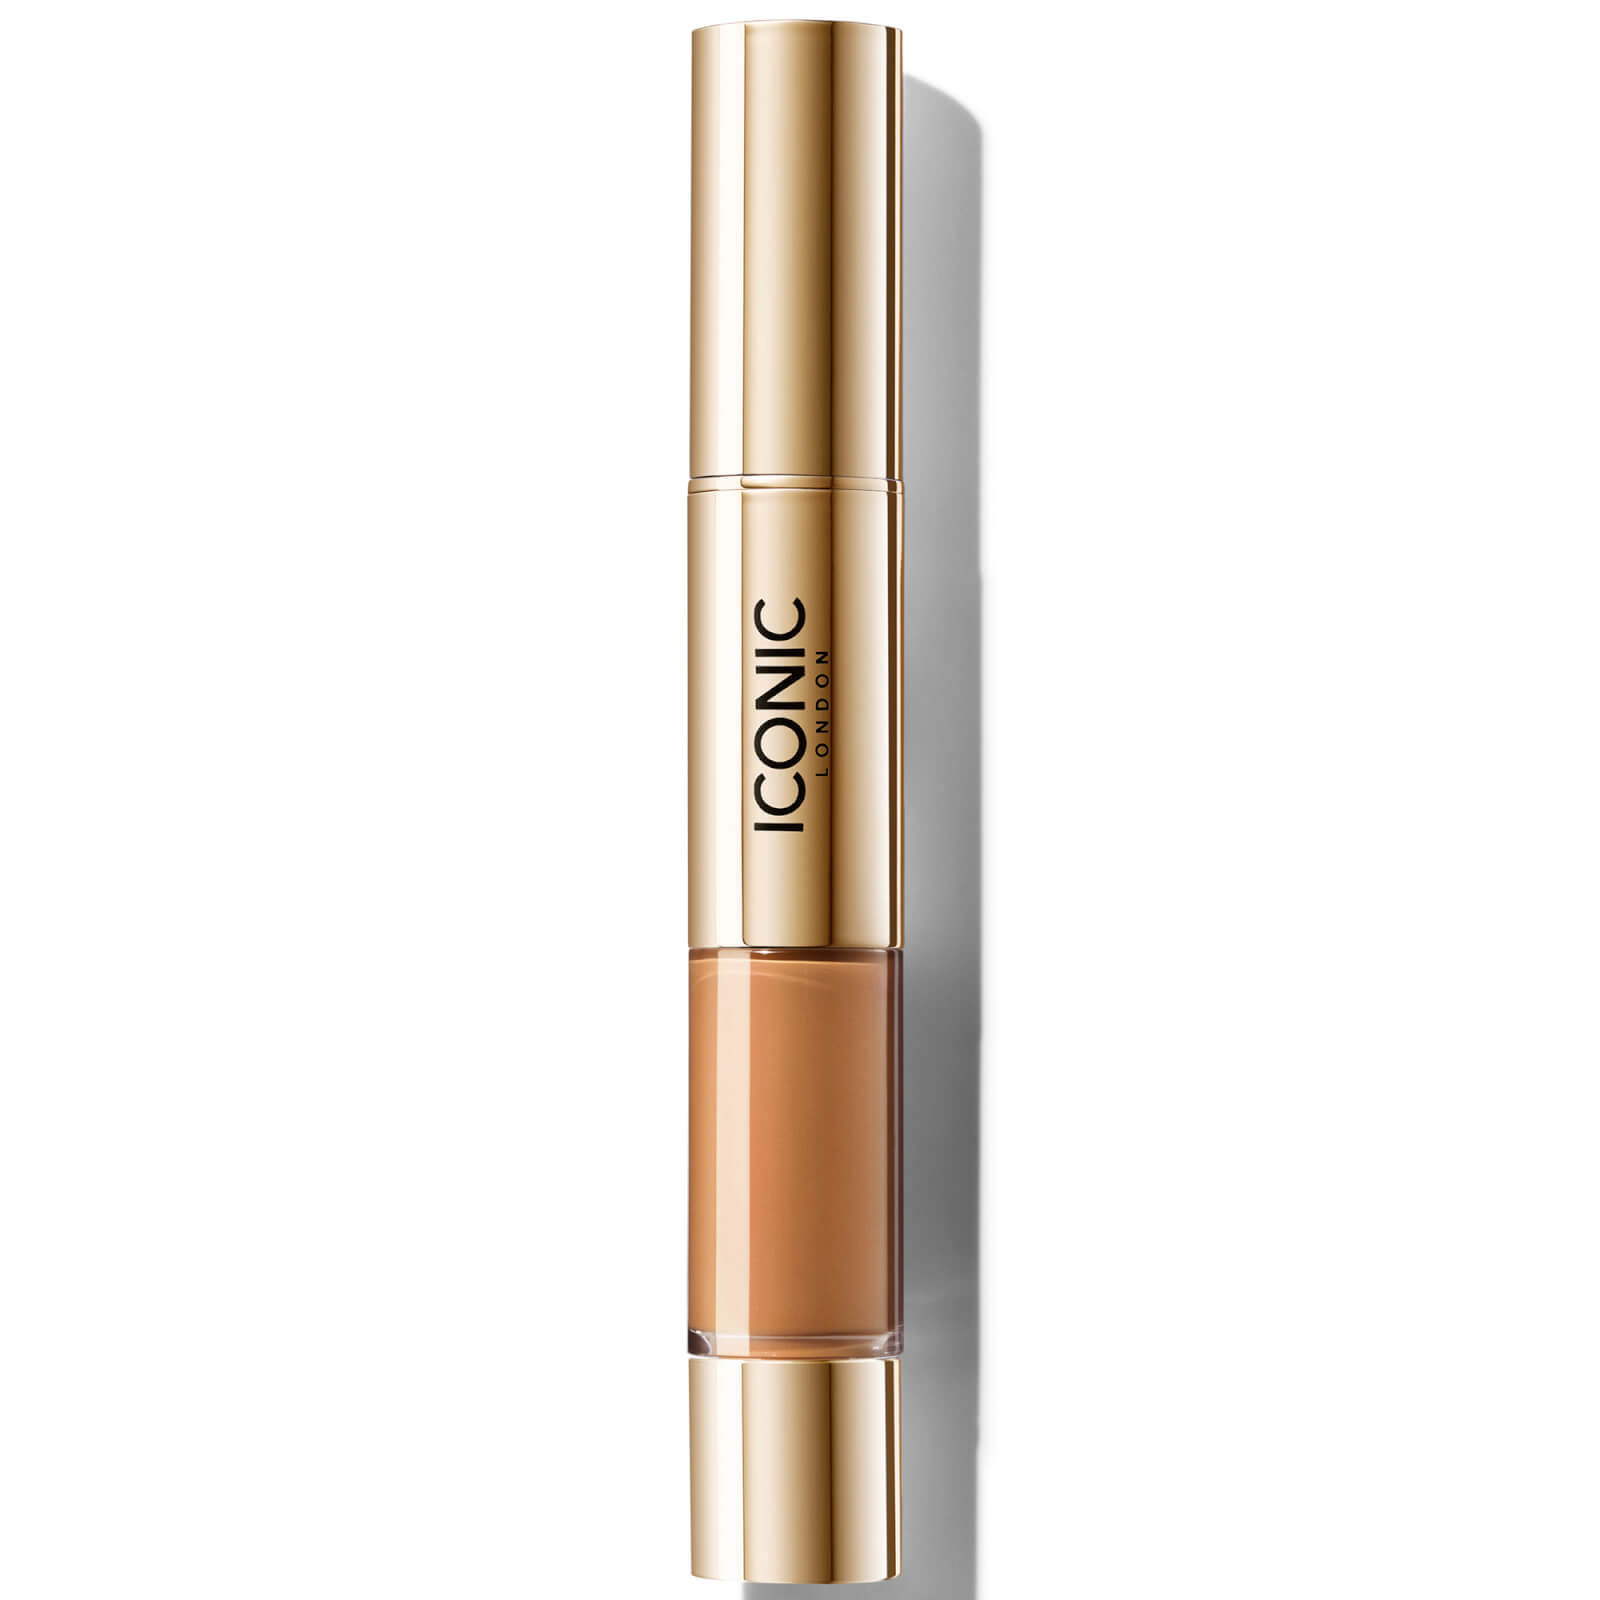 iconic london radiant concealer and brightening duo neutral tan